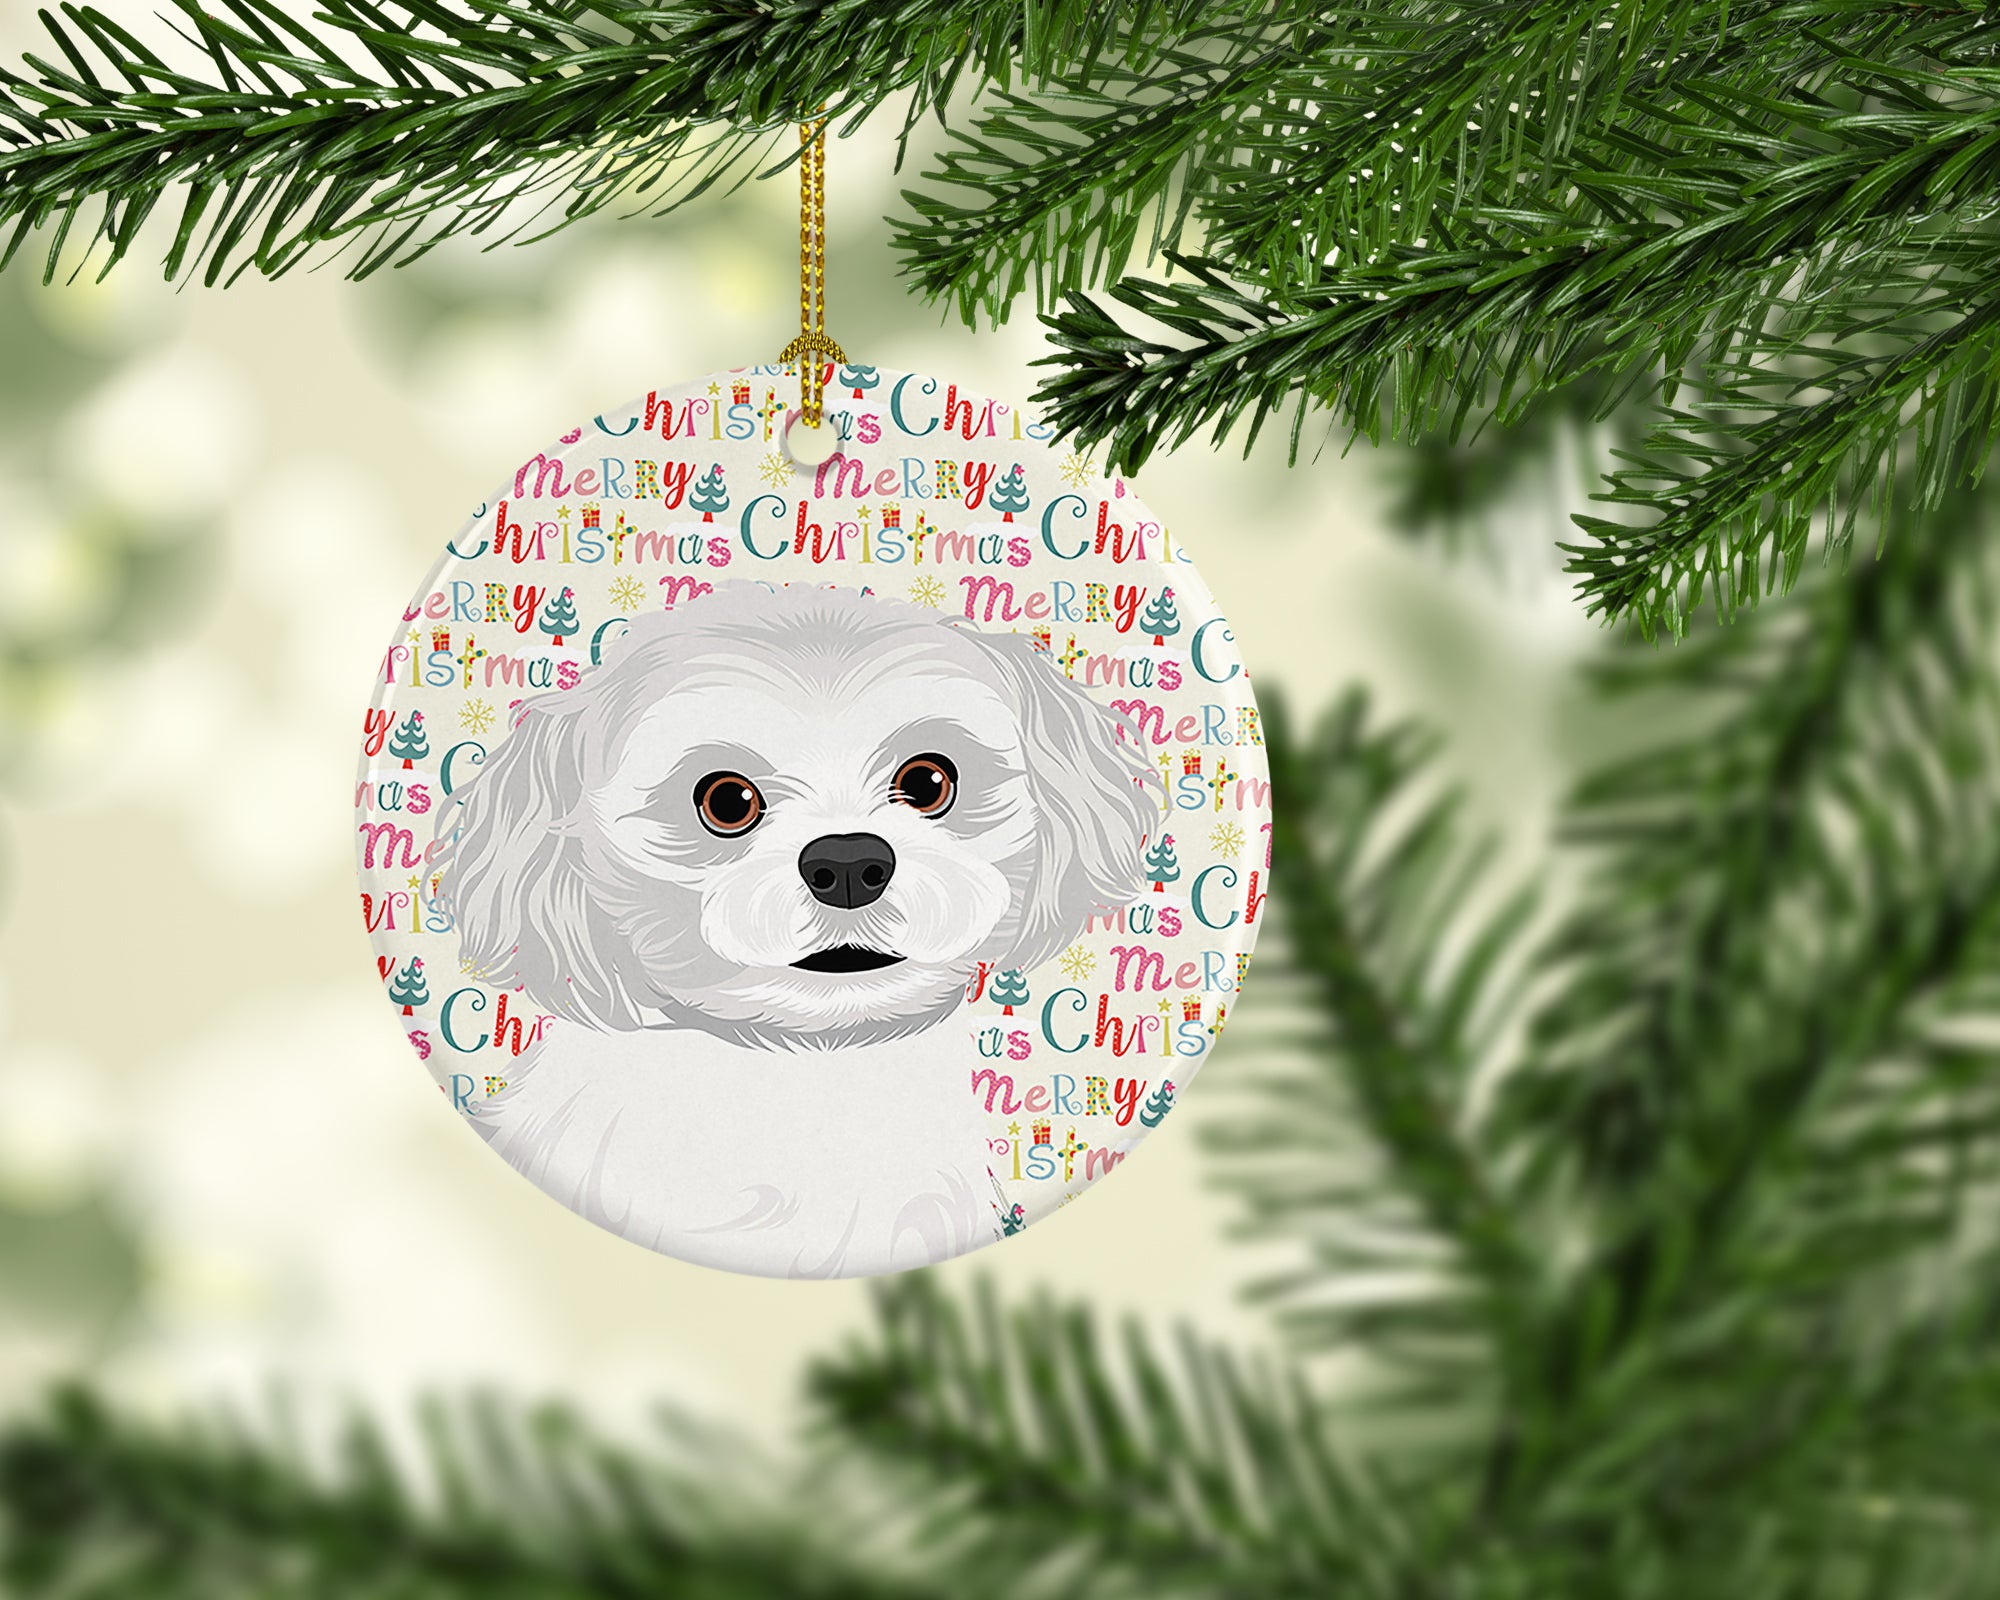 Buy this Shih-Tzu Silver and White #1 Christmas Ceramic Ornament